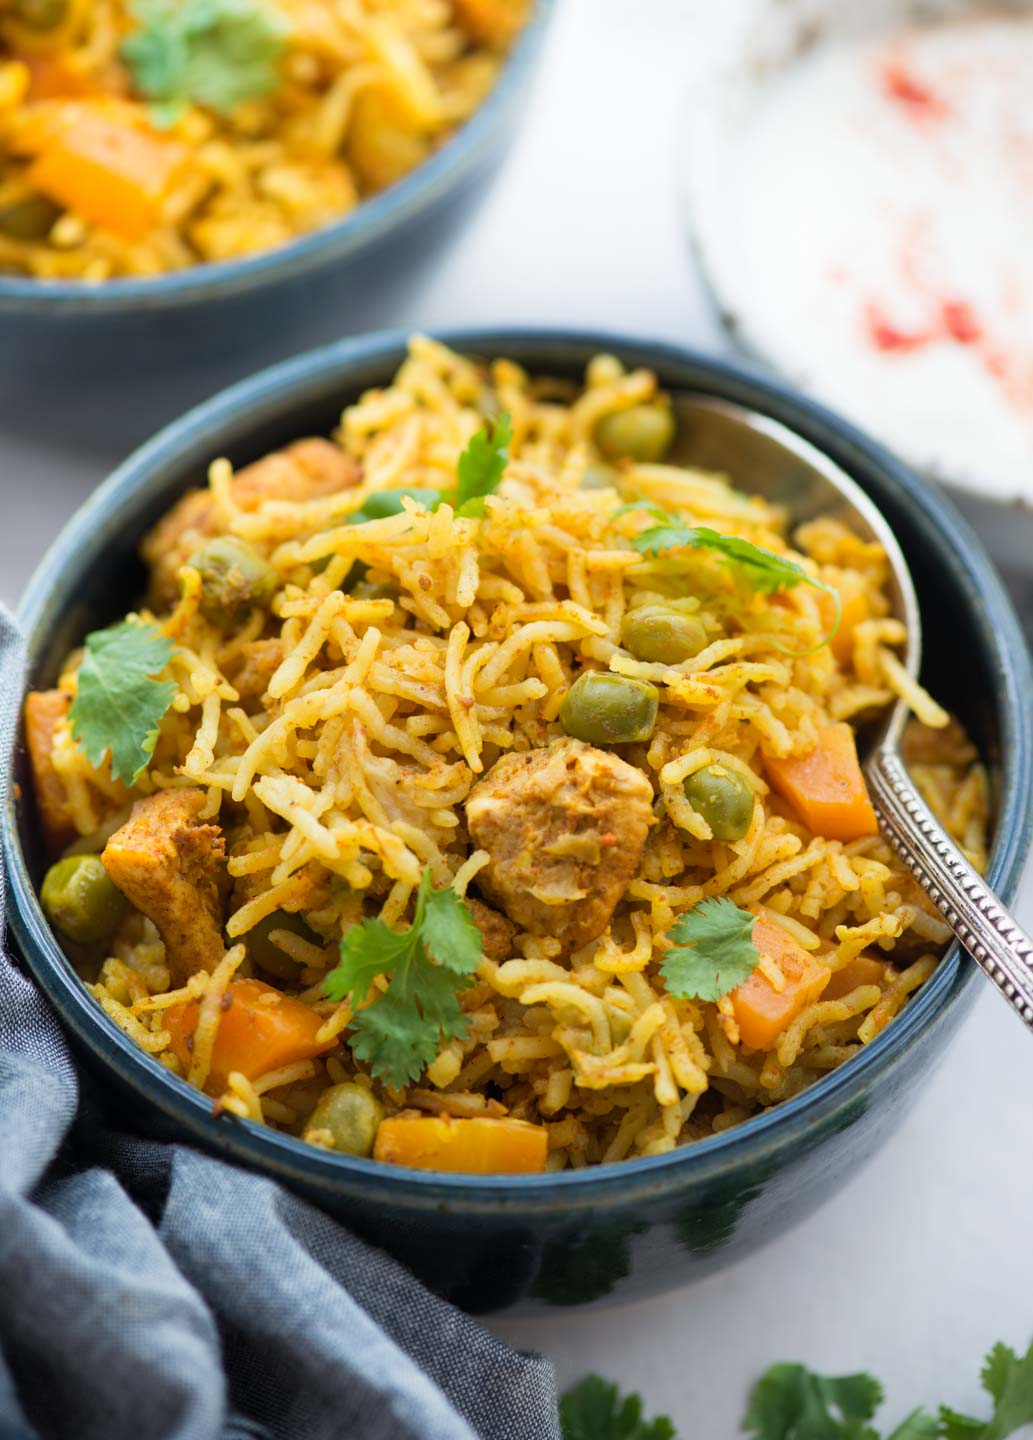 Instant Pot Chicken and rice, curried chicken and rice made in the Instant Pot is flavoured with garlic, ginger and curry powder. Fluffy basmati rice, chicken, carrot, peas, this wholesome meal is definitely going to impress you.